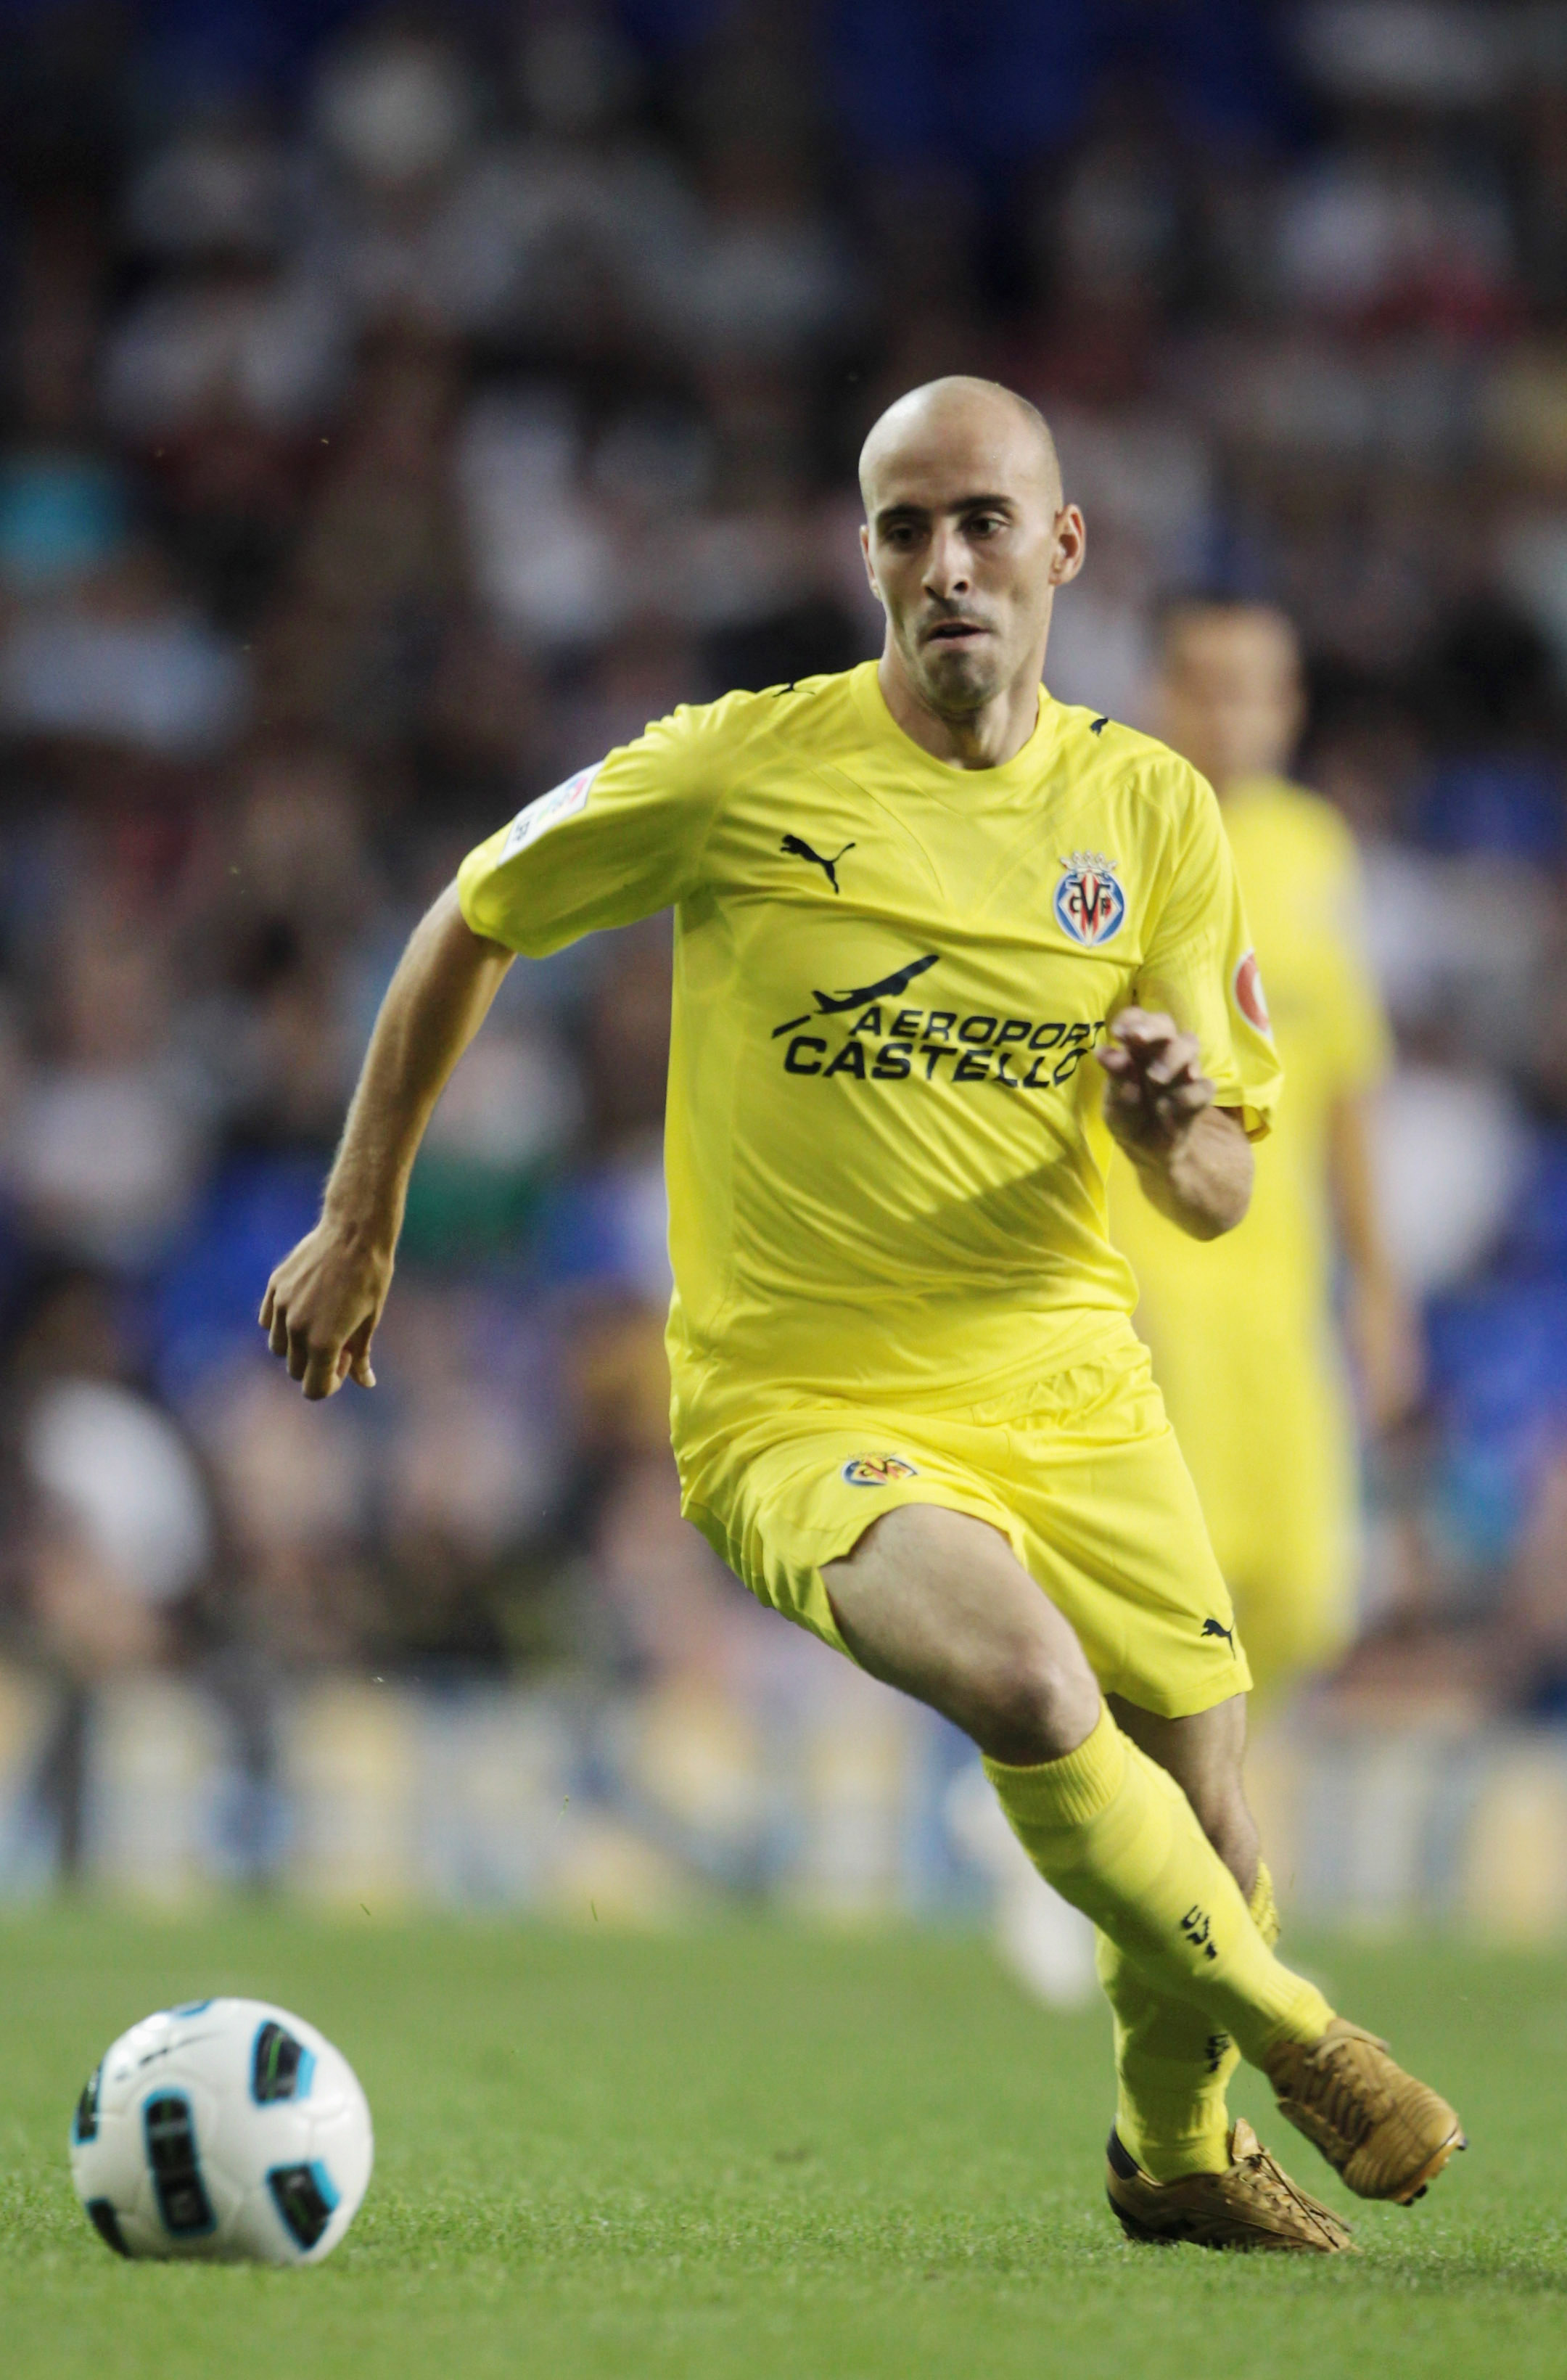 LONDON, ENGLAND - JULY 29:  Borja Valero of  Villarreal during a Pre-Season Friendly between Tottenham Hotspur and  Villarreal at White Hart Lane on July 29, 2010 in London, England.  (Photo by Phil Cole/Getty Images)